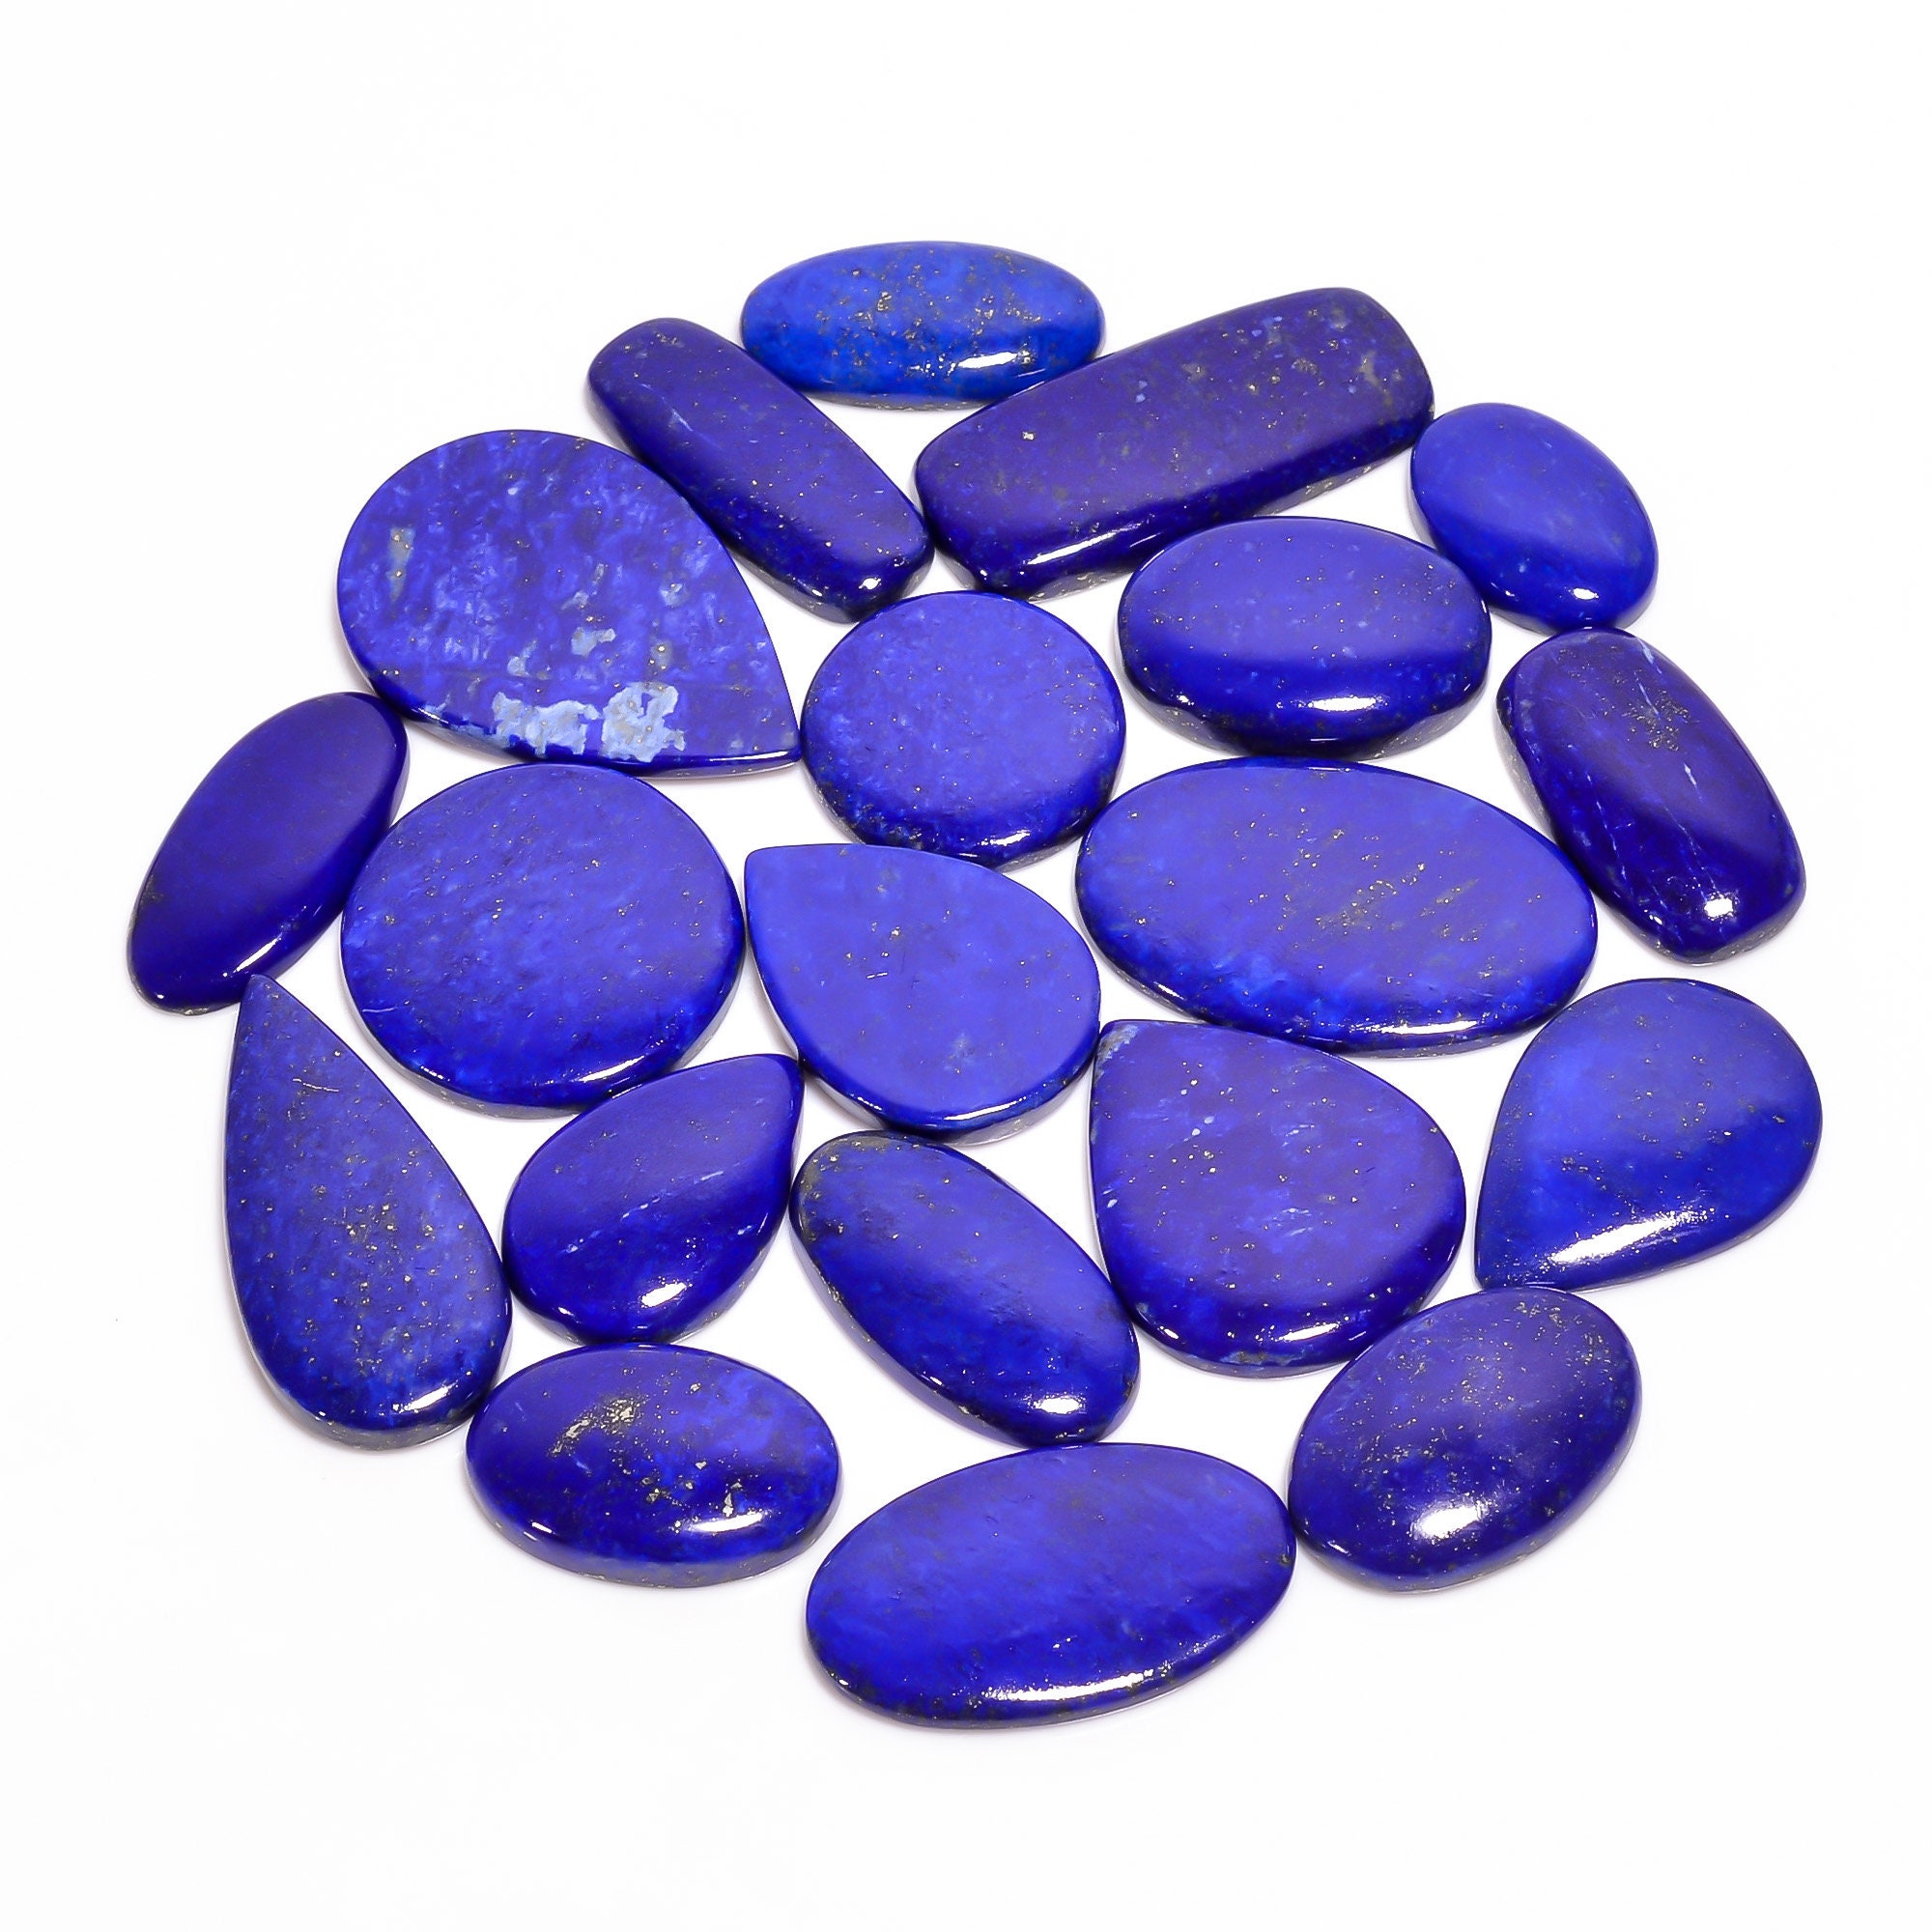 Loose Natural Gemstone Cabochon Lot Lapis Lazuli Cabochon Lot Assorted Lapis Lazuli Cabochon Wholesale Supply For Jewelry Making 